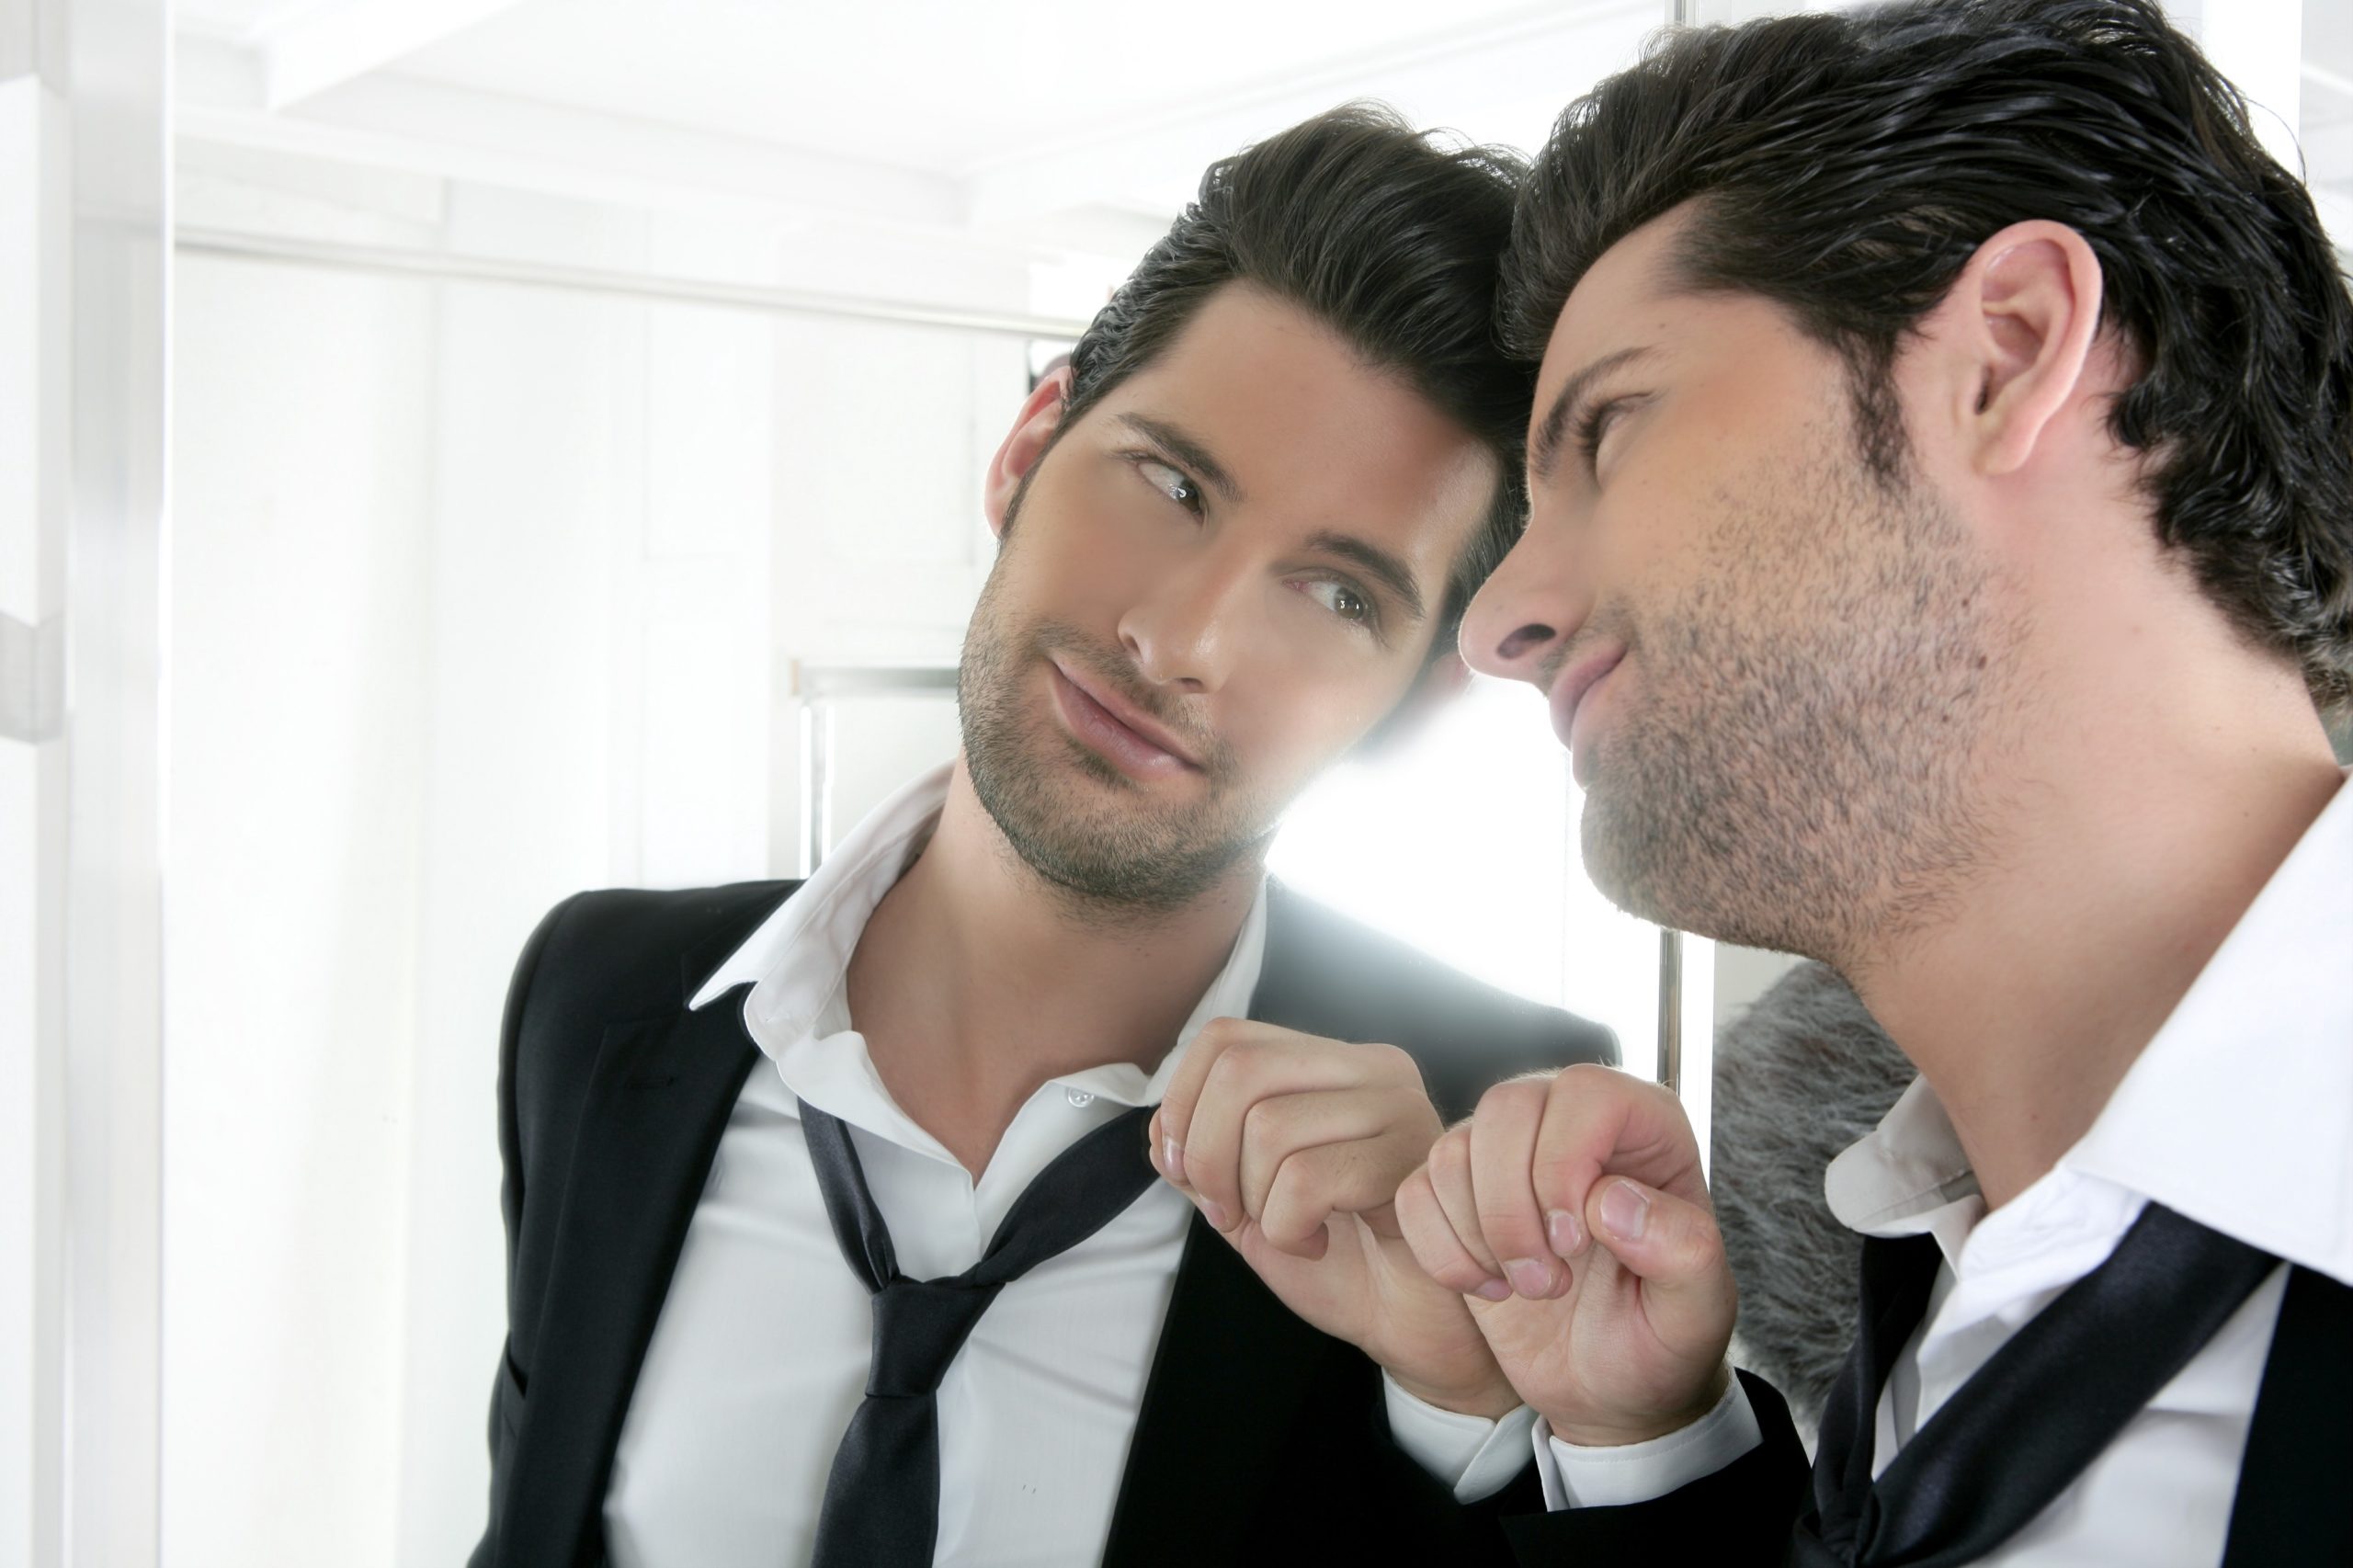 Dealing with narcissism